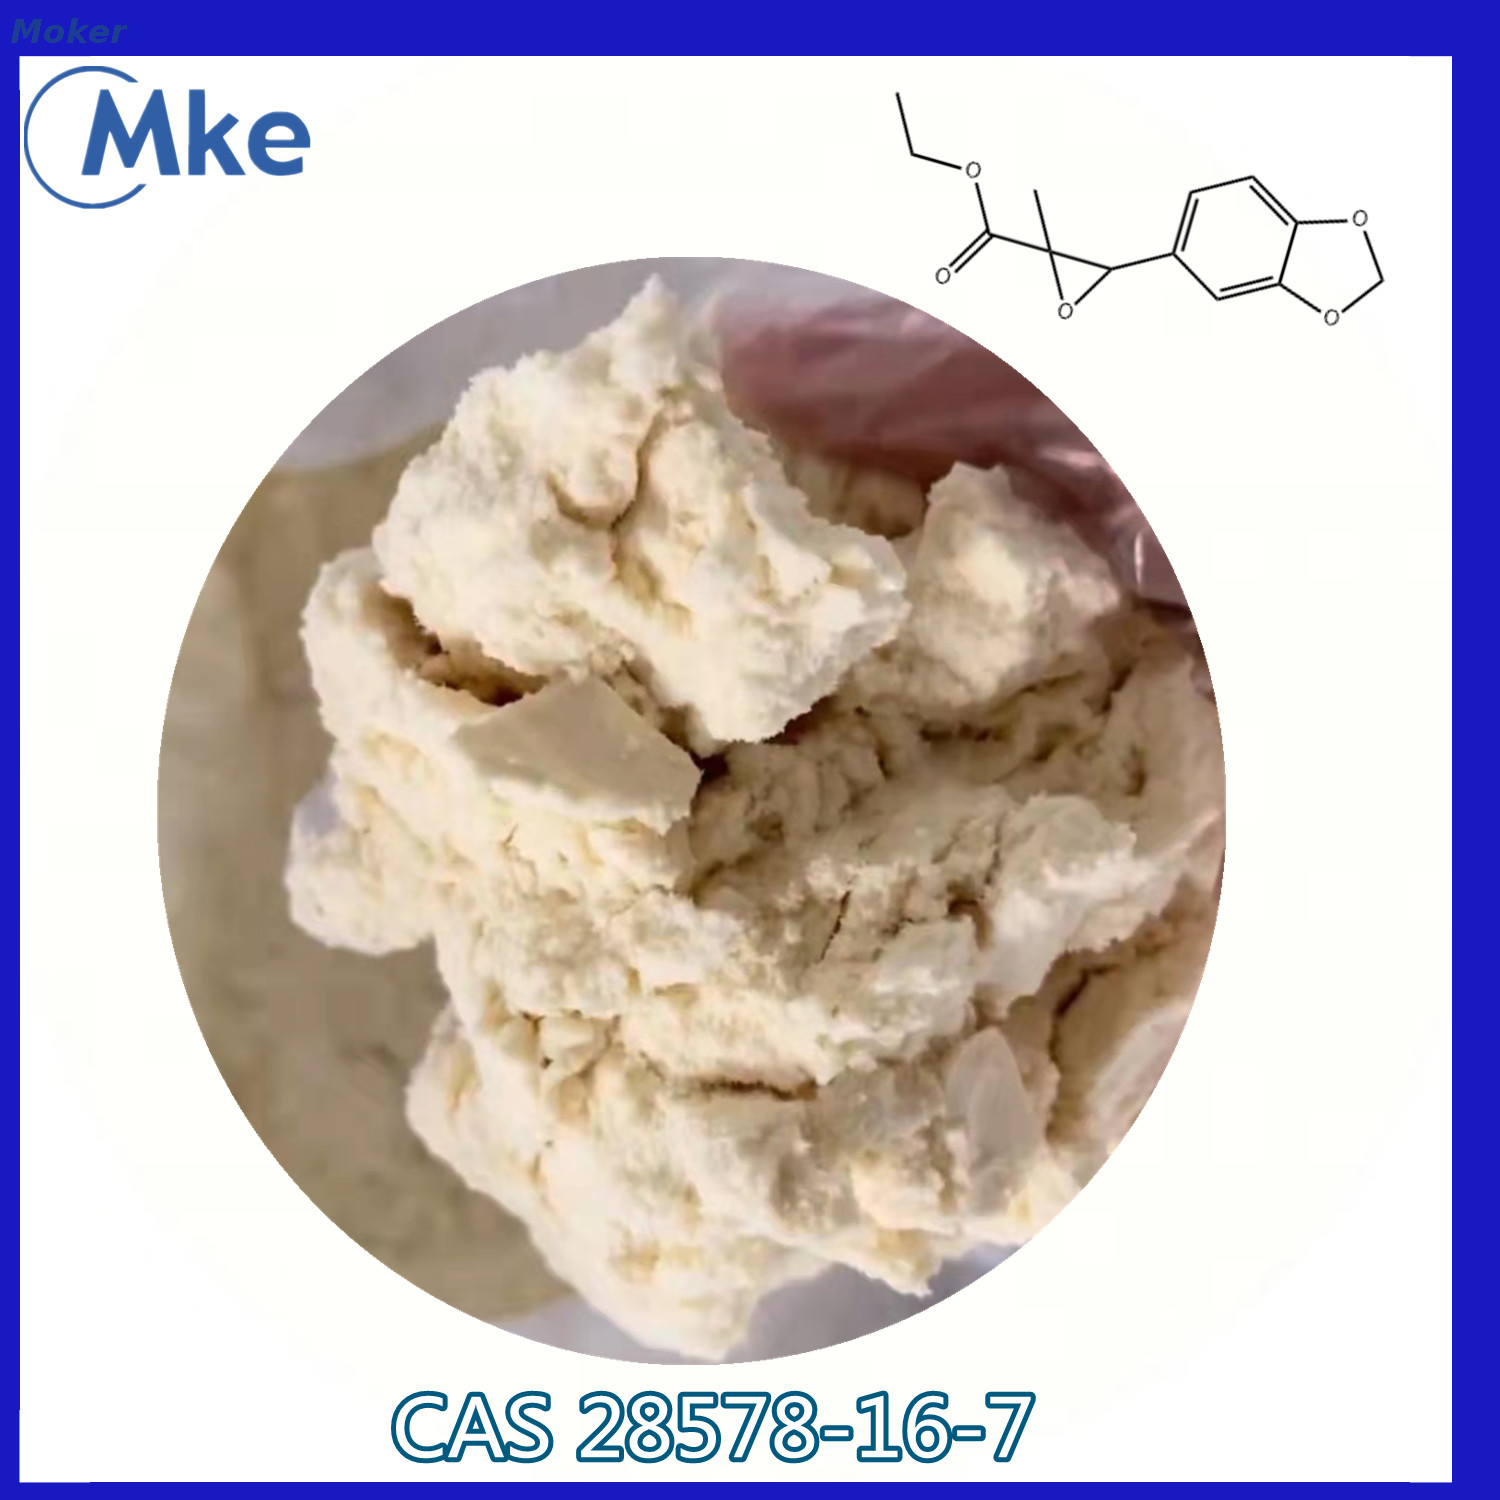 High Yield Rate Pure New Pmk Ethyl Glycidate Powder Cas 28578-16-7 with factofy price